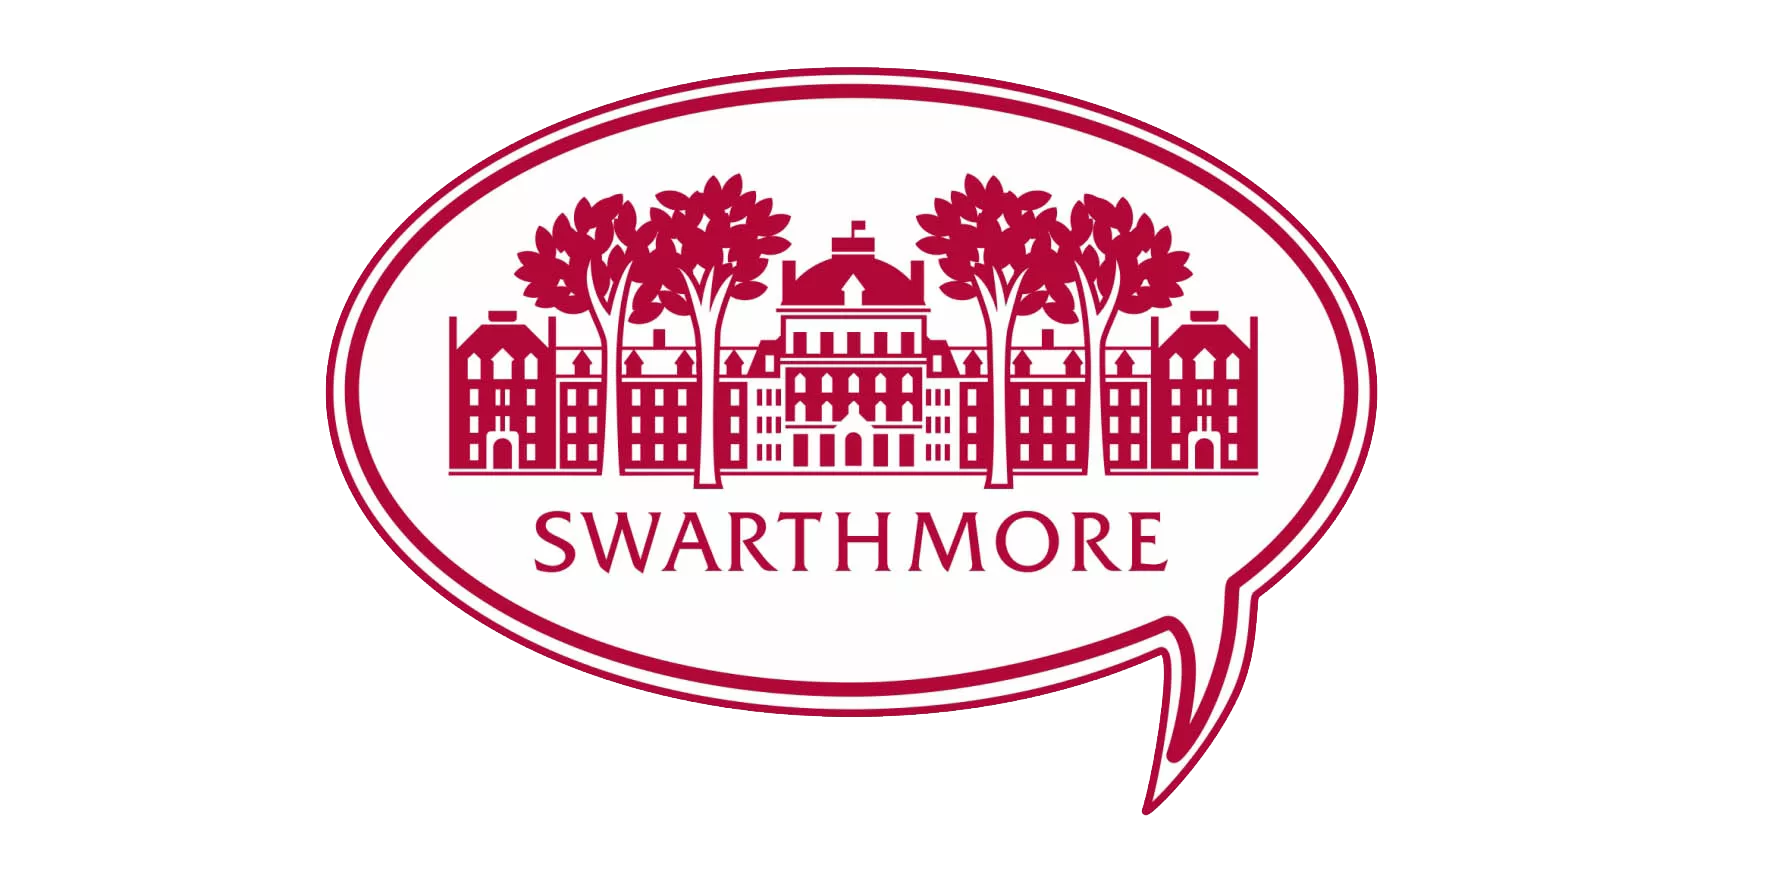 Living, Working, and Living - A Swarthmore College Self-Study